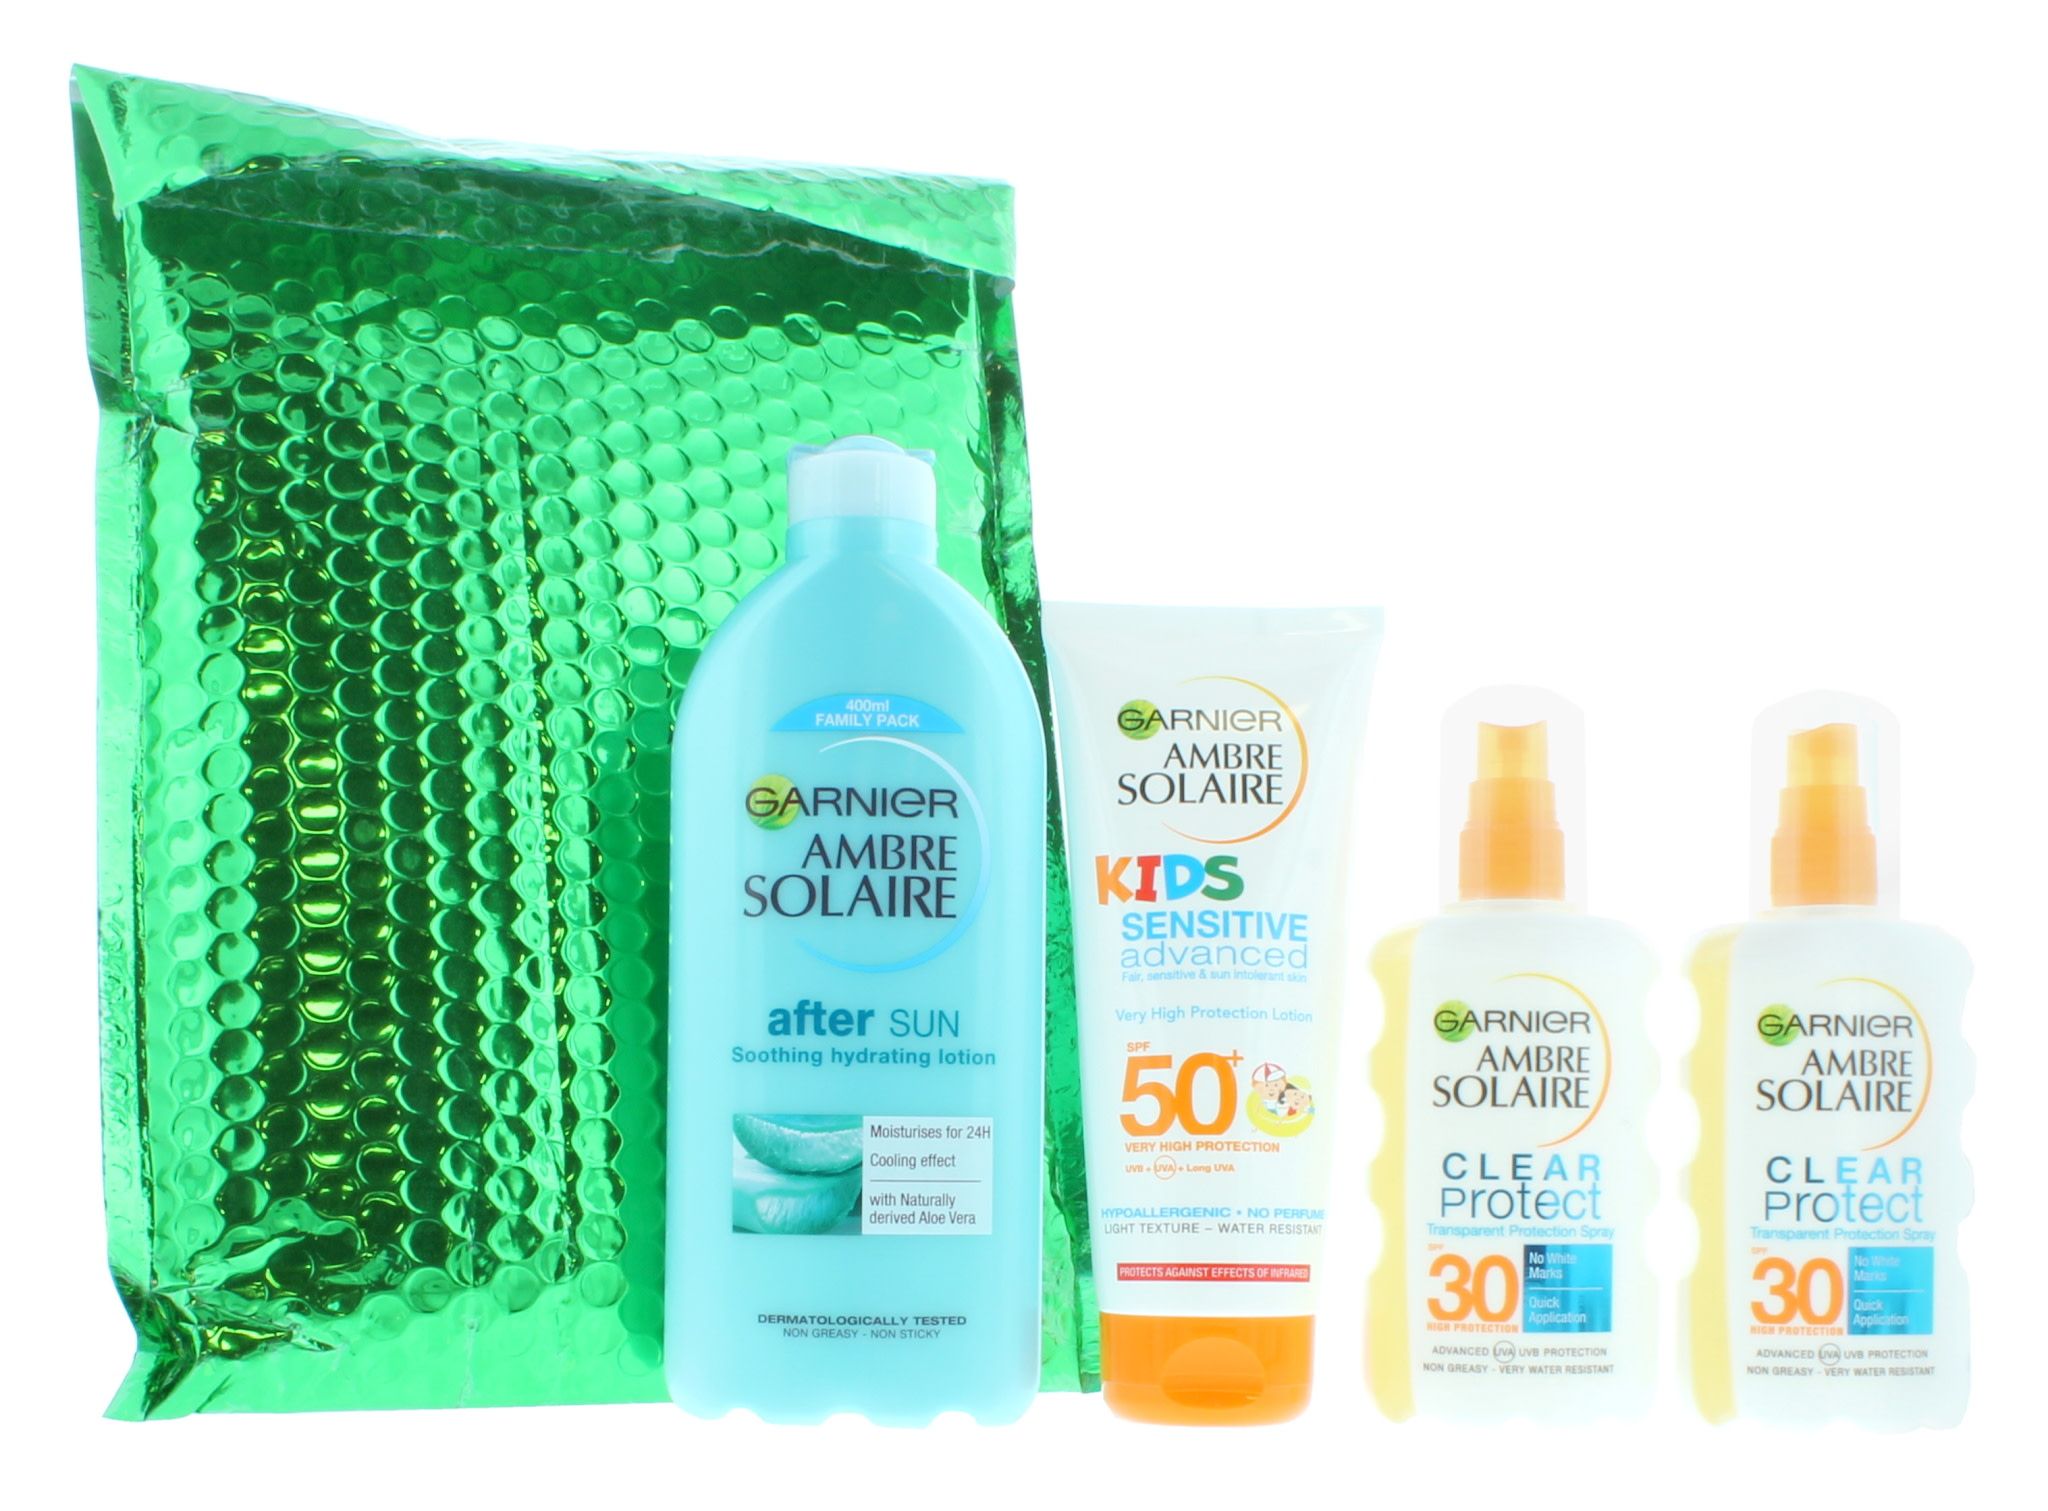 Ambre Solaire Family Sun Care Kit - After Sun + 2 x SPF30 and Kids SPF50. Clear Protect Sun Cream Spray - This high protection, transparent formula leaves no white marks. Non-greasy, water-resistant. Sensitive Enhanced Kids Lotion - This very high protection SPF50+ lotion is specially developed for childrens’ delicate and sensitive skin; hypoallergenic, no perfumes or colourants. Family Size After Sun Lotion - Garnier after sun is enriched with naturally derived Aloe Vera; the formula provides 24 hours hydration and soothes and nourishes skin. All of Garnier sun protection products contain UVA and UVB protection and is tested under paediatric control. Garnier’s research into sun protection is recognised by the British skin foundation. This is a pack of 2.